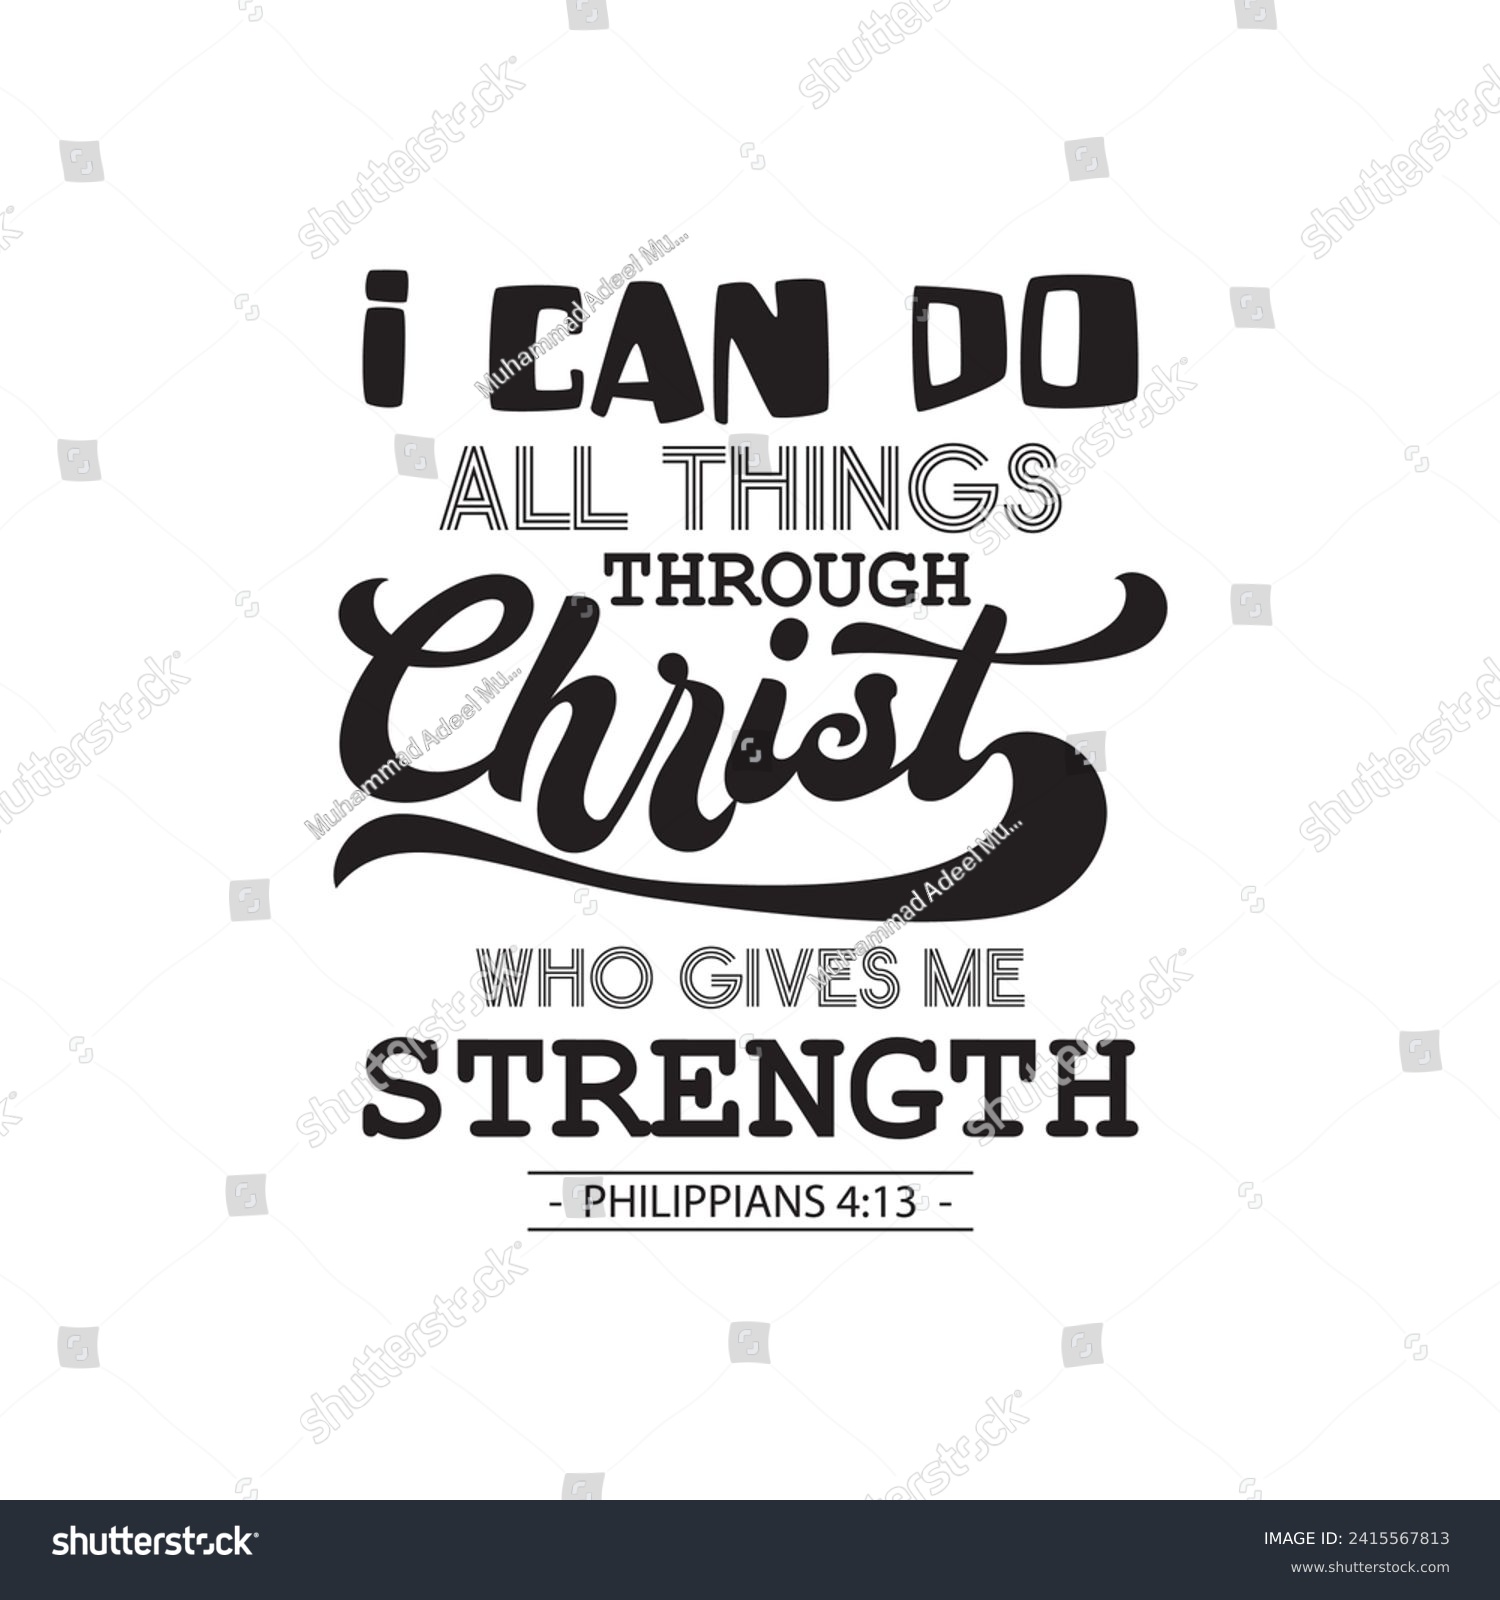 SVG of I can do all things through Christ who gives me strength. Bible verse PHILIPPIANS 4:13. Vector illustration for tshirt, website, print, clip art, poster and print on demand merchandise. svg